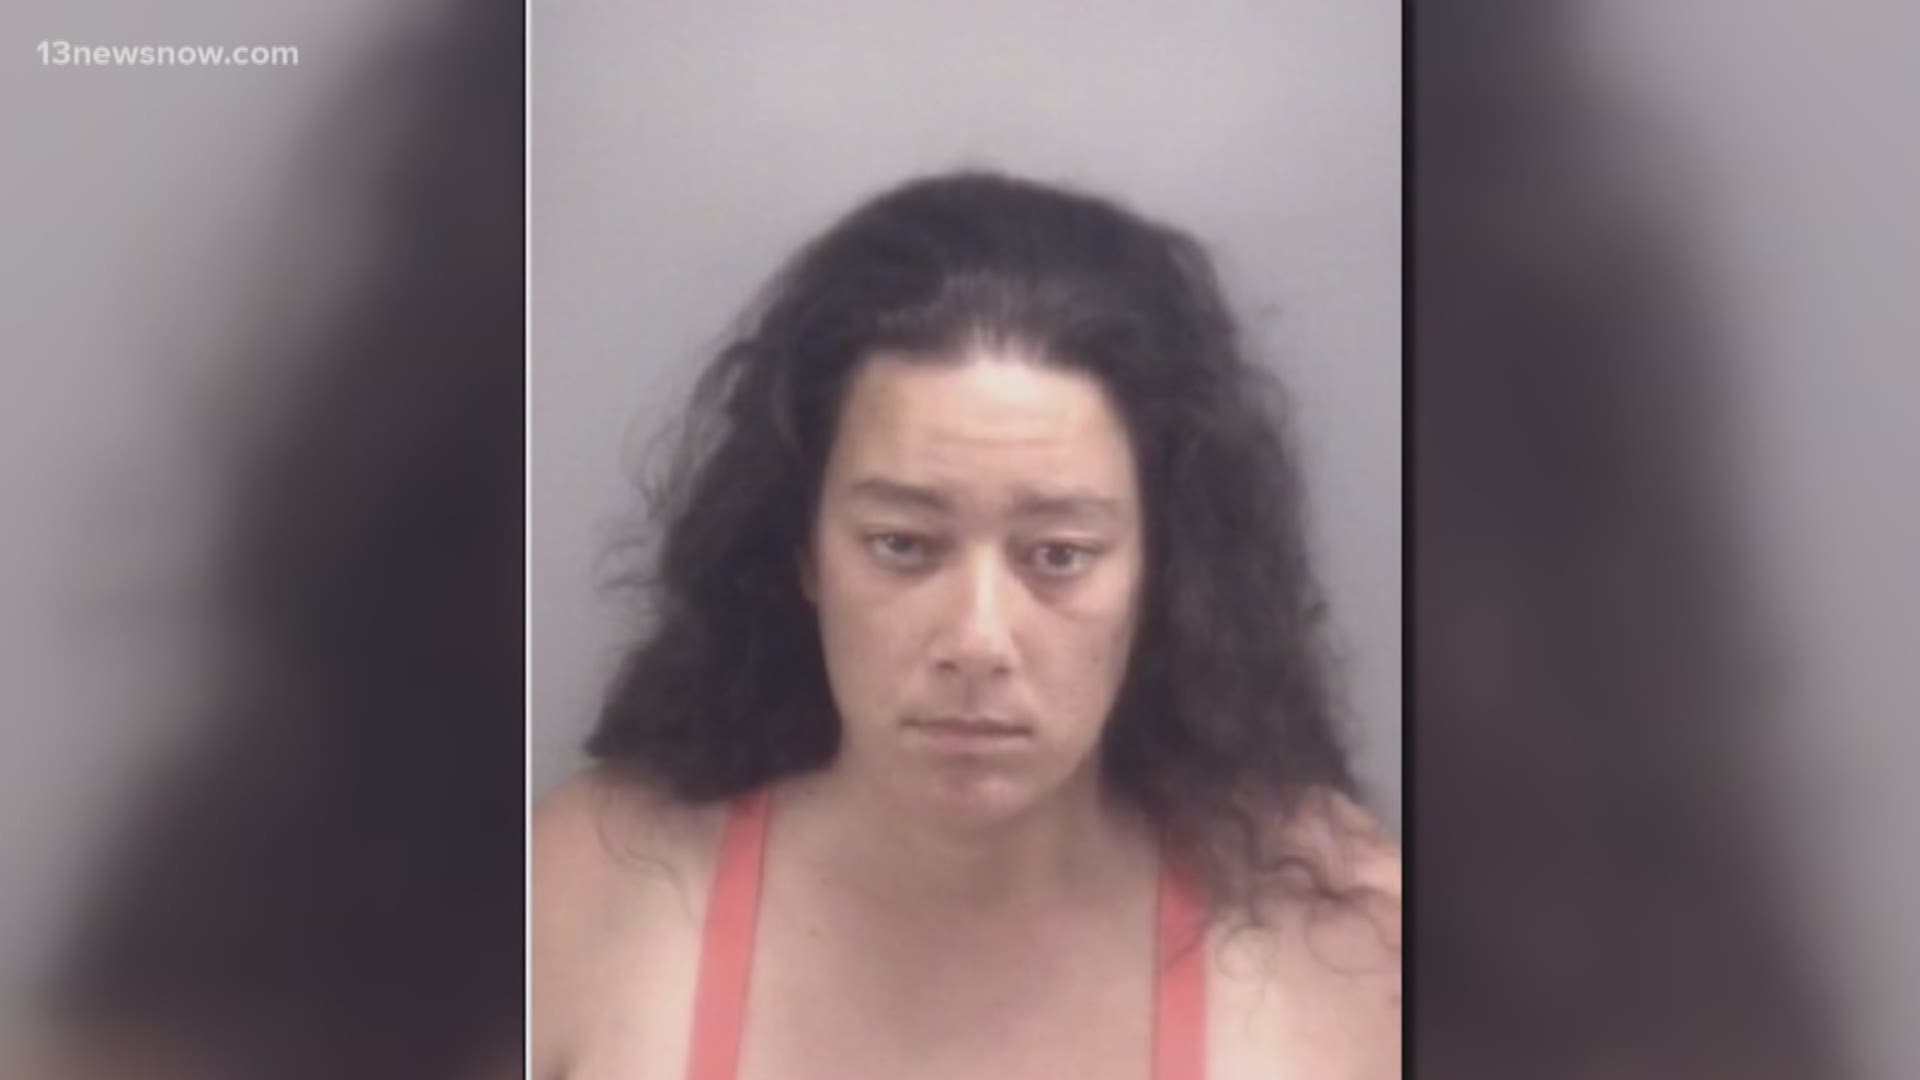 Virginia Beach police said Patricia Metz tried to abduct two children from a Target and assaulted adults that were with them.